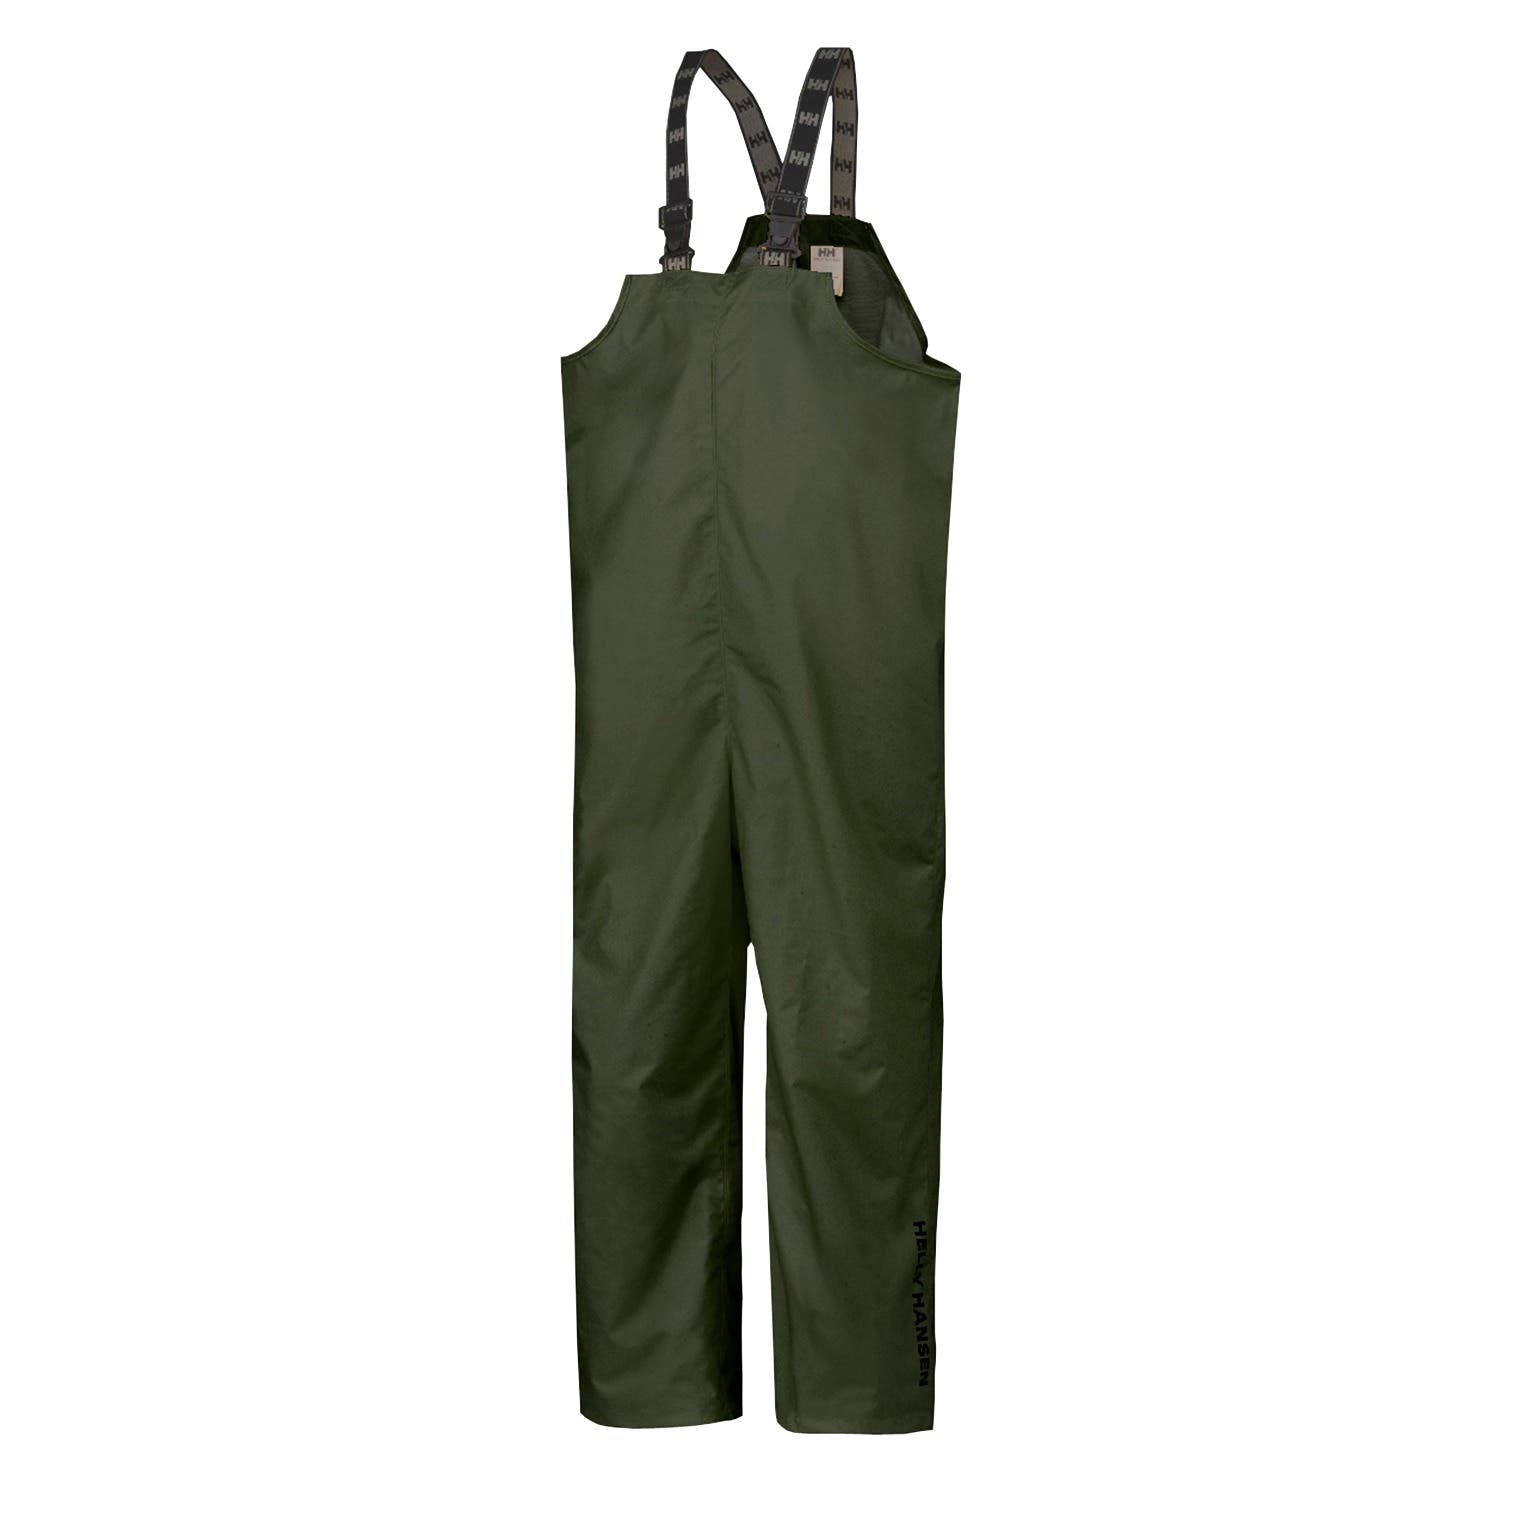 Helly Hansen Men's Mandal Rain Bib in Army Green from the front